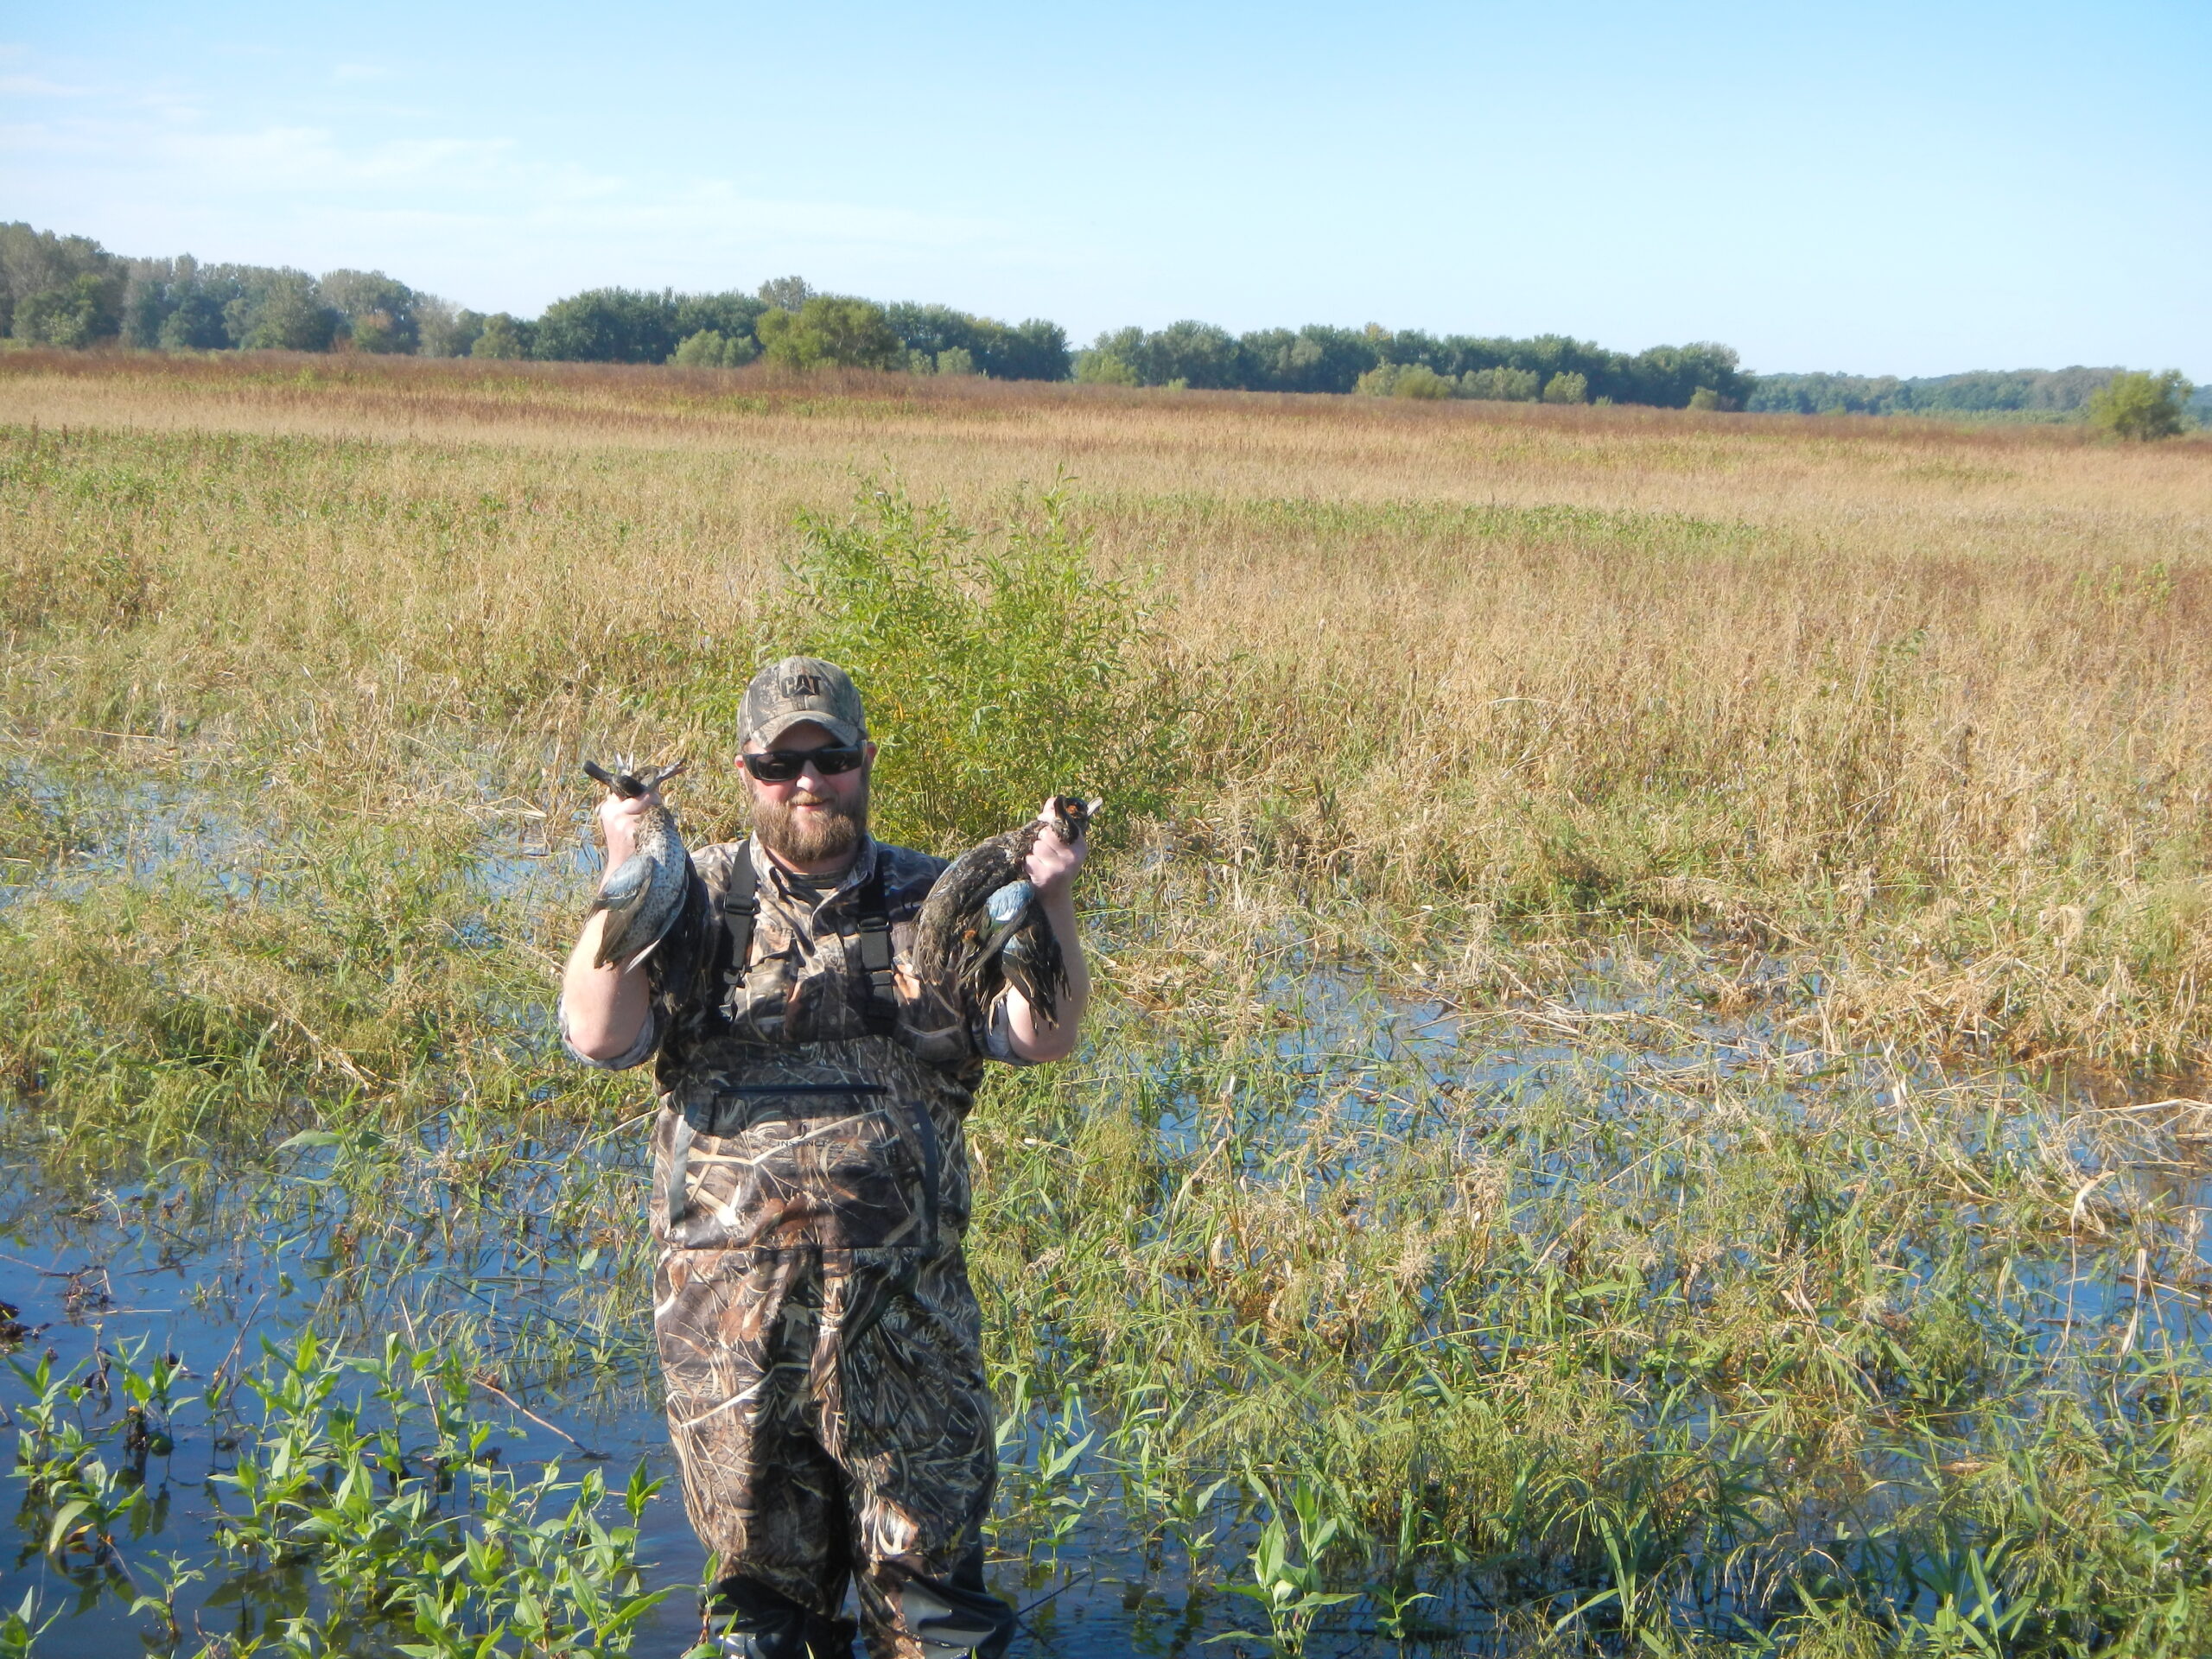 A successful day teal hunting on Illinois public land.